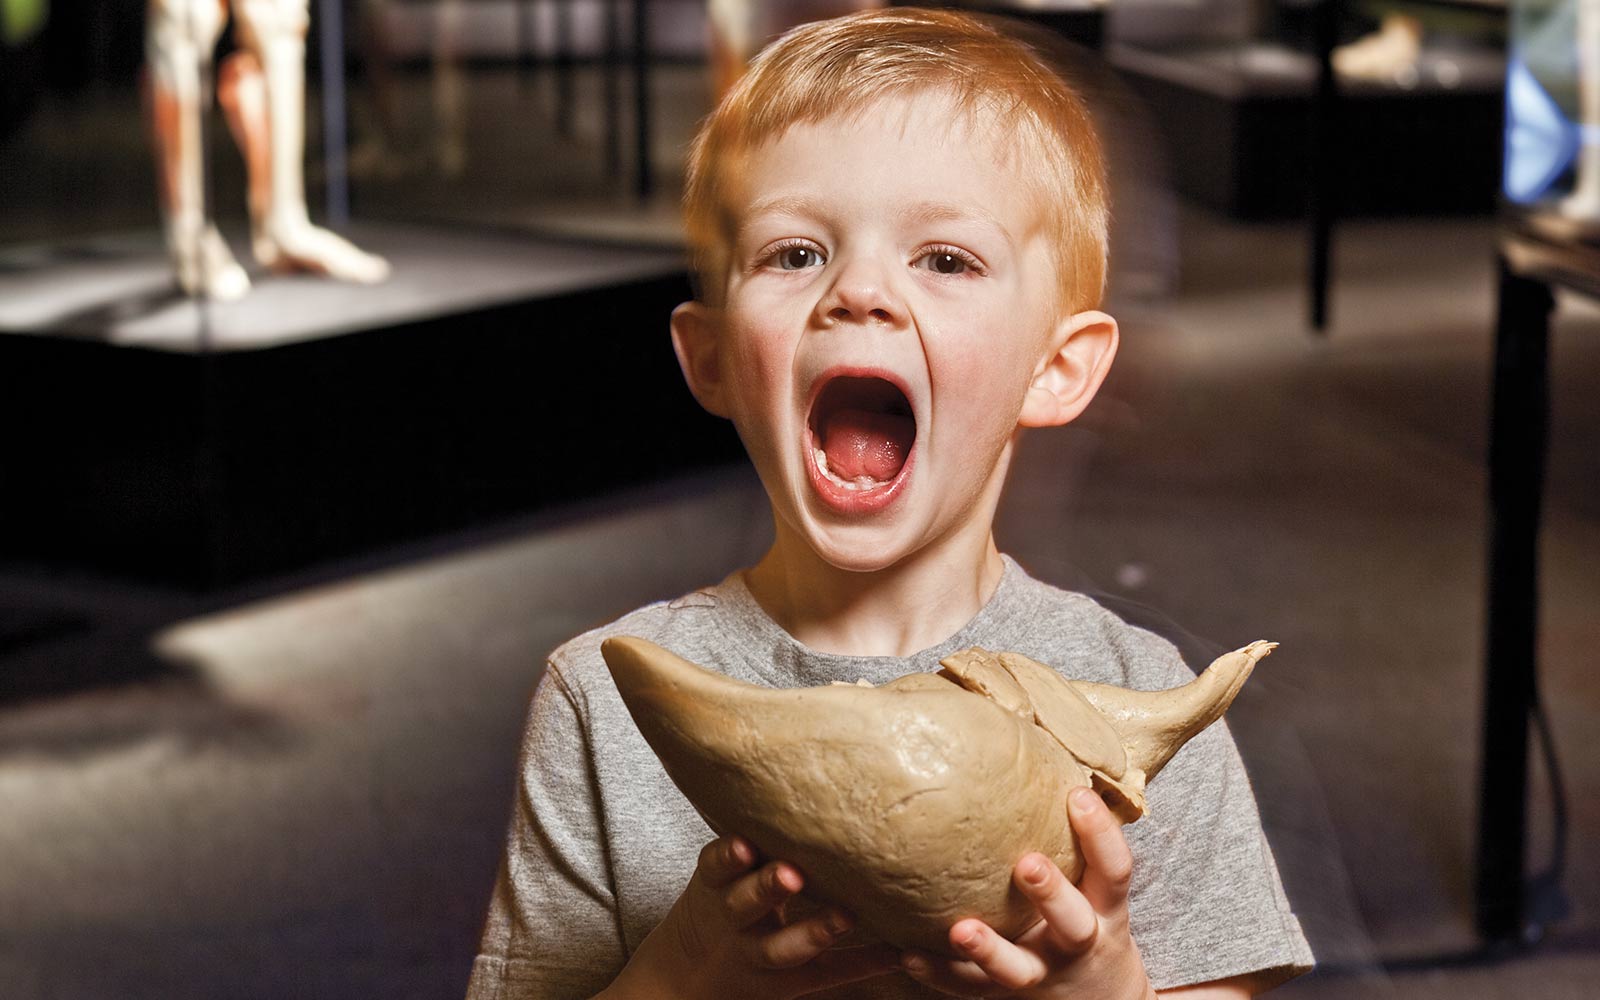 A kid can learn a lot about the human body at the Kentucky Science Center these days. The BODY WORLDS exhibit has a few organs that have been through the plastination process and are now available for "hands-on" learning.